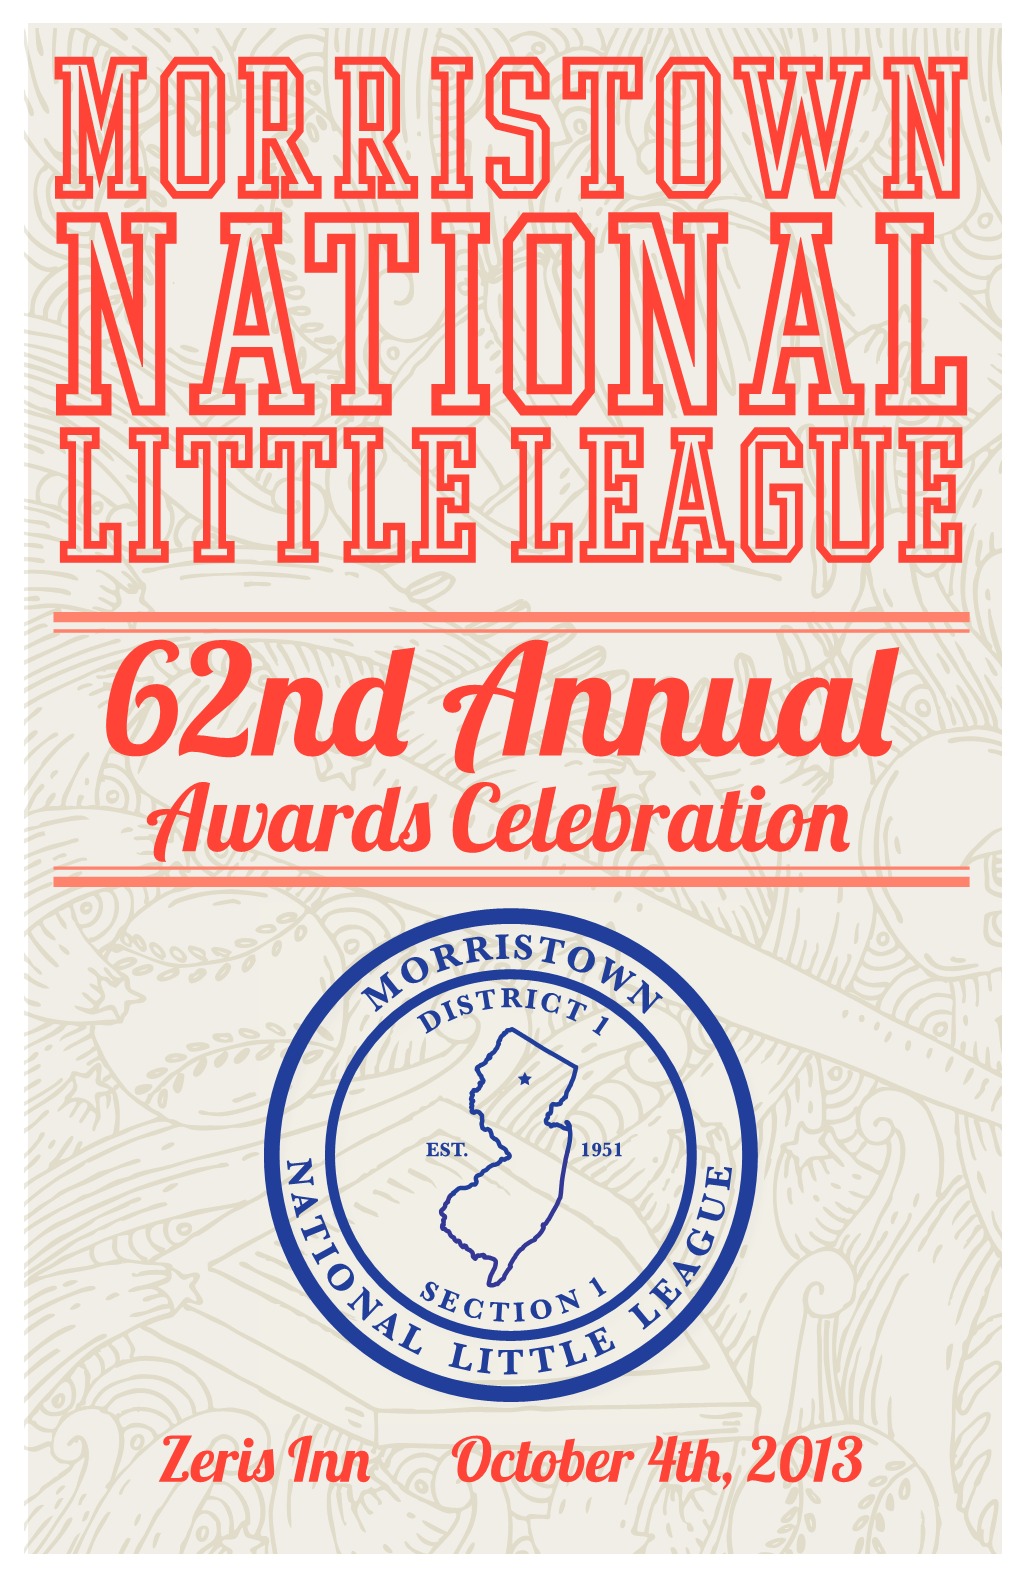 Morristown National Little League 62Nd Annual Awards Celebration